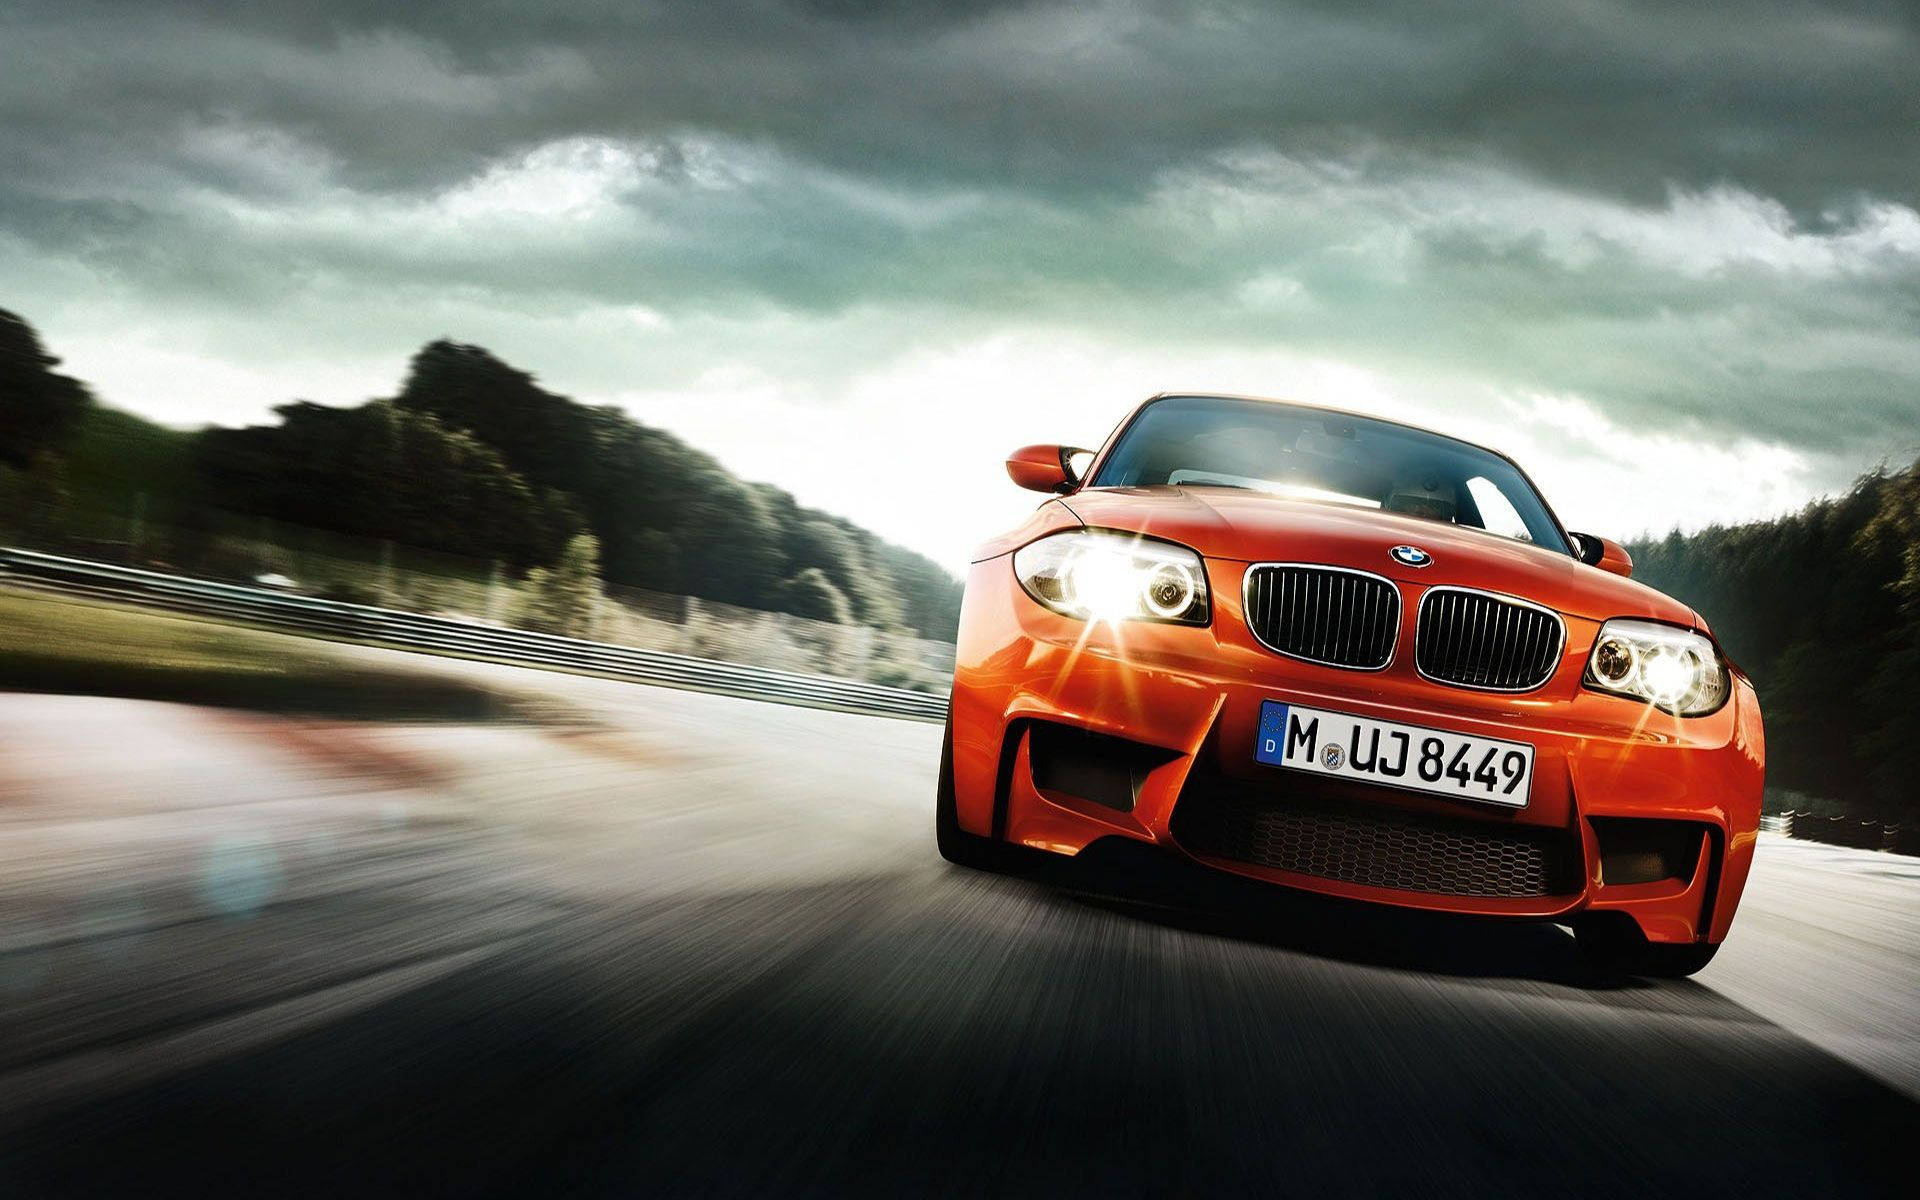 Free Bmw Wallpaper Downloads, [300+] Bmw Wallpapers for FREE | Wallpapers .com